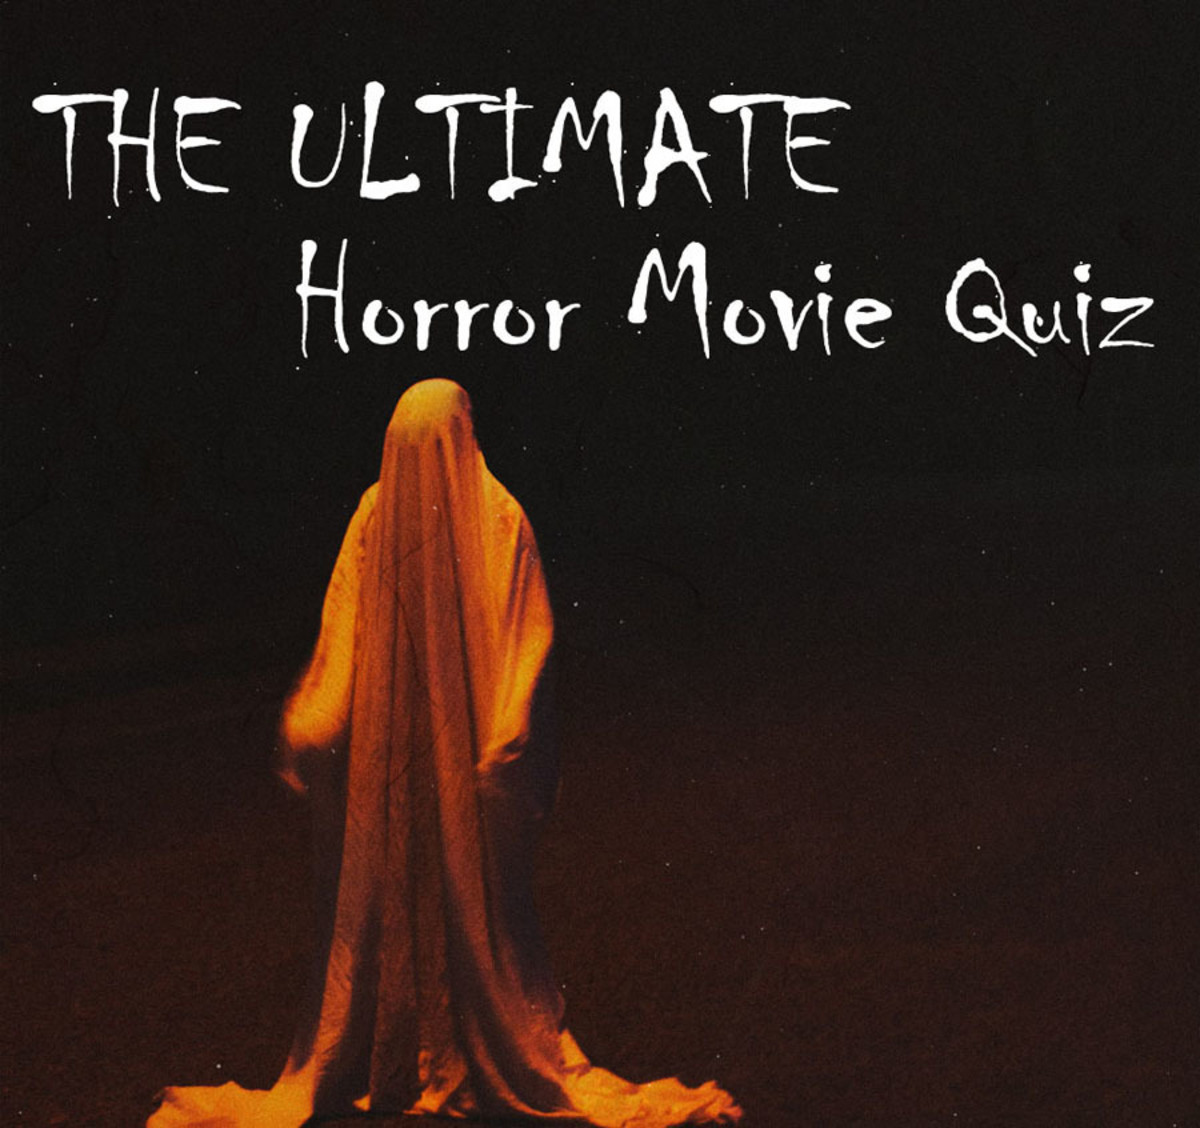 The Horror Movie Quiz To End All Horror Movie Quizzes